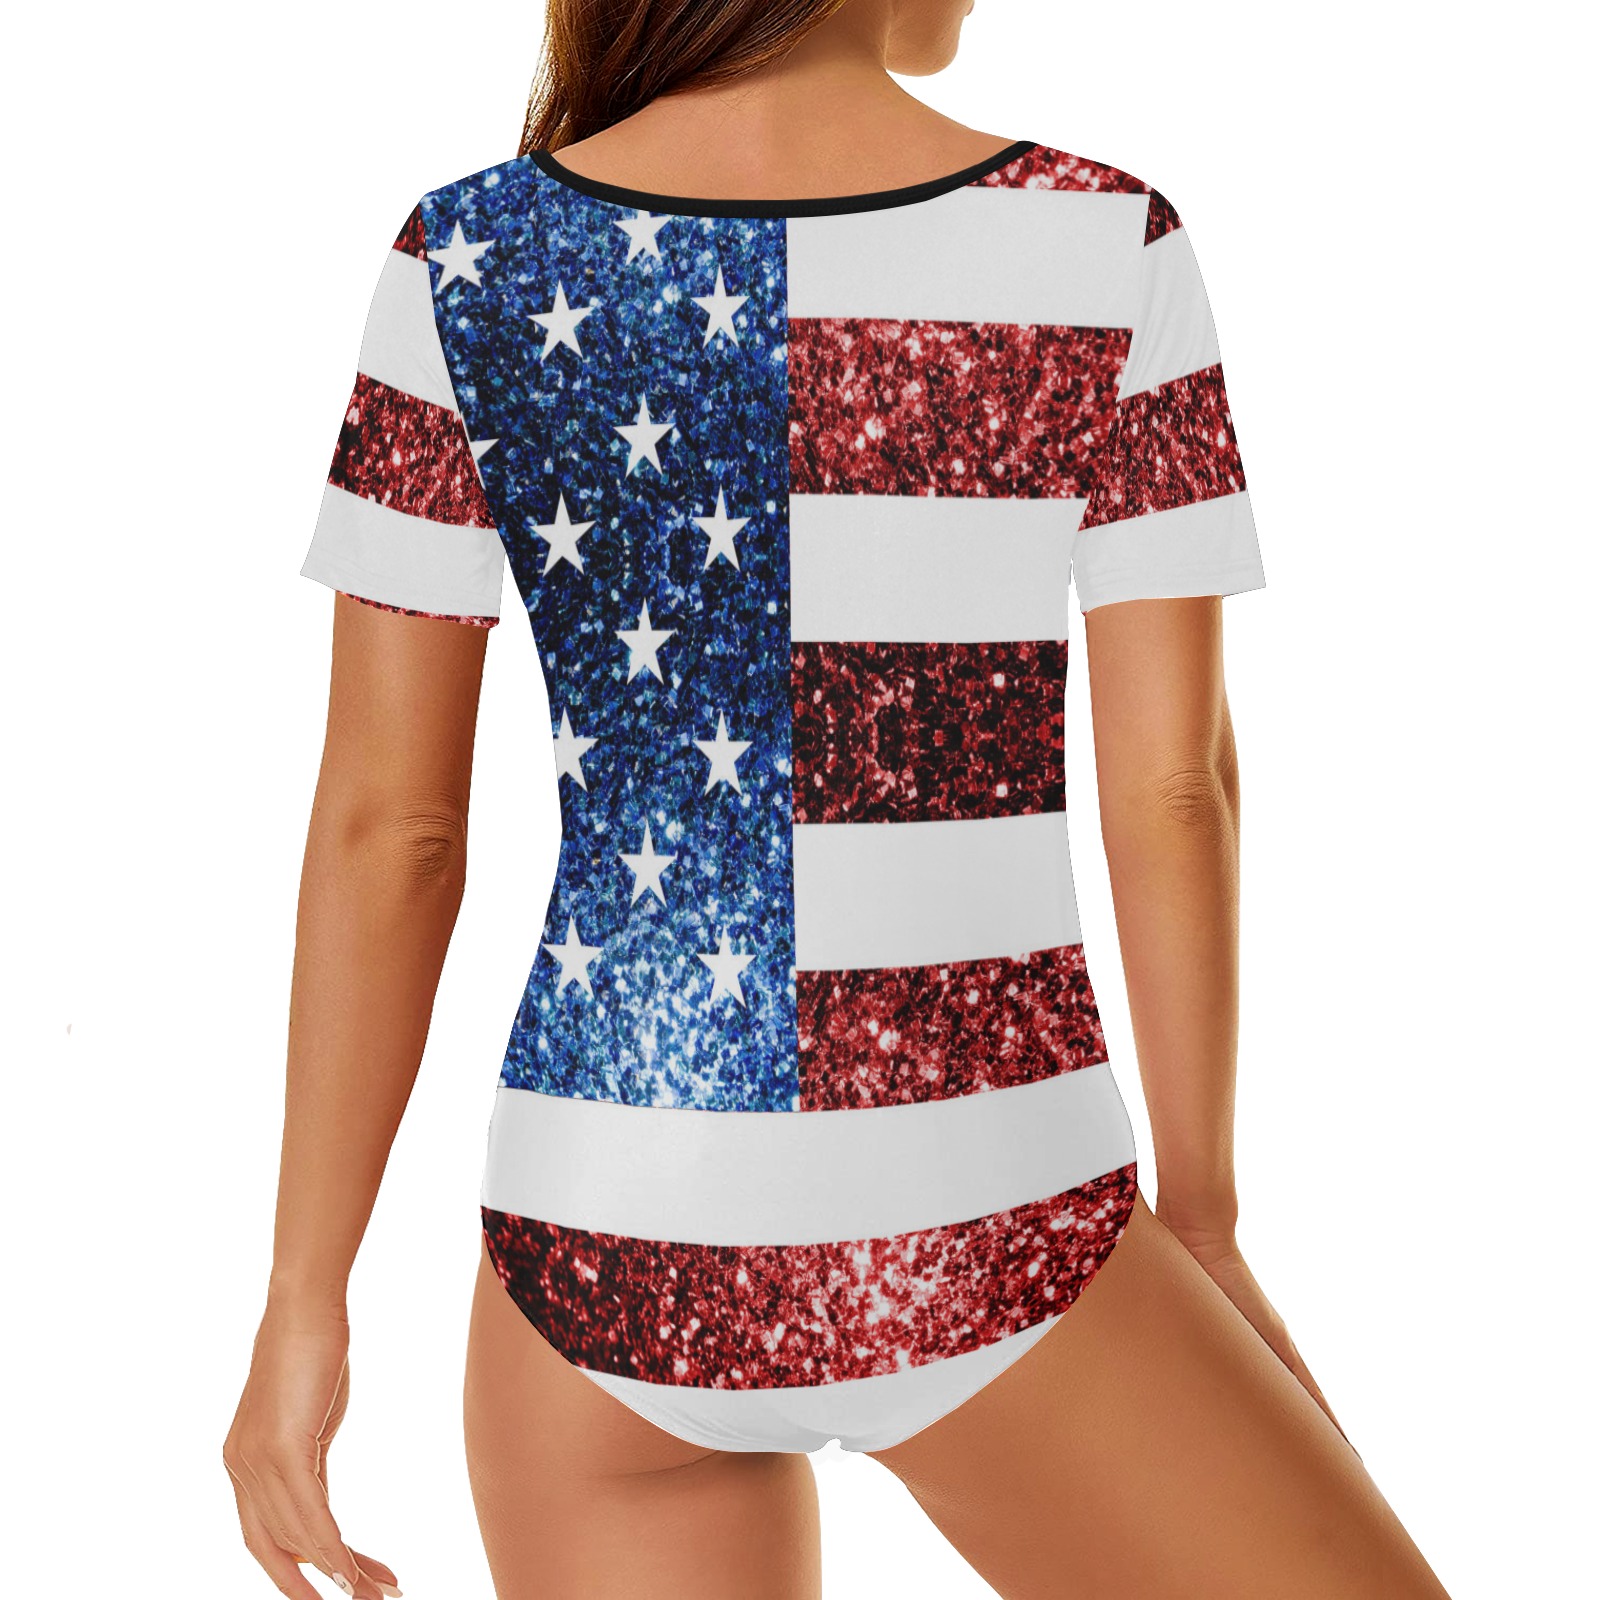 Sparkly USA flag America Red White Blue faux Sparkles patriotic bling 4th of July Women's Short Sleeve Bodysuit